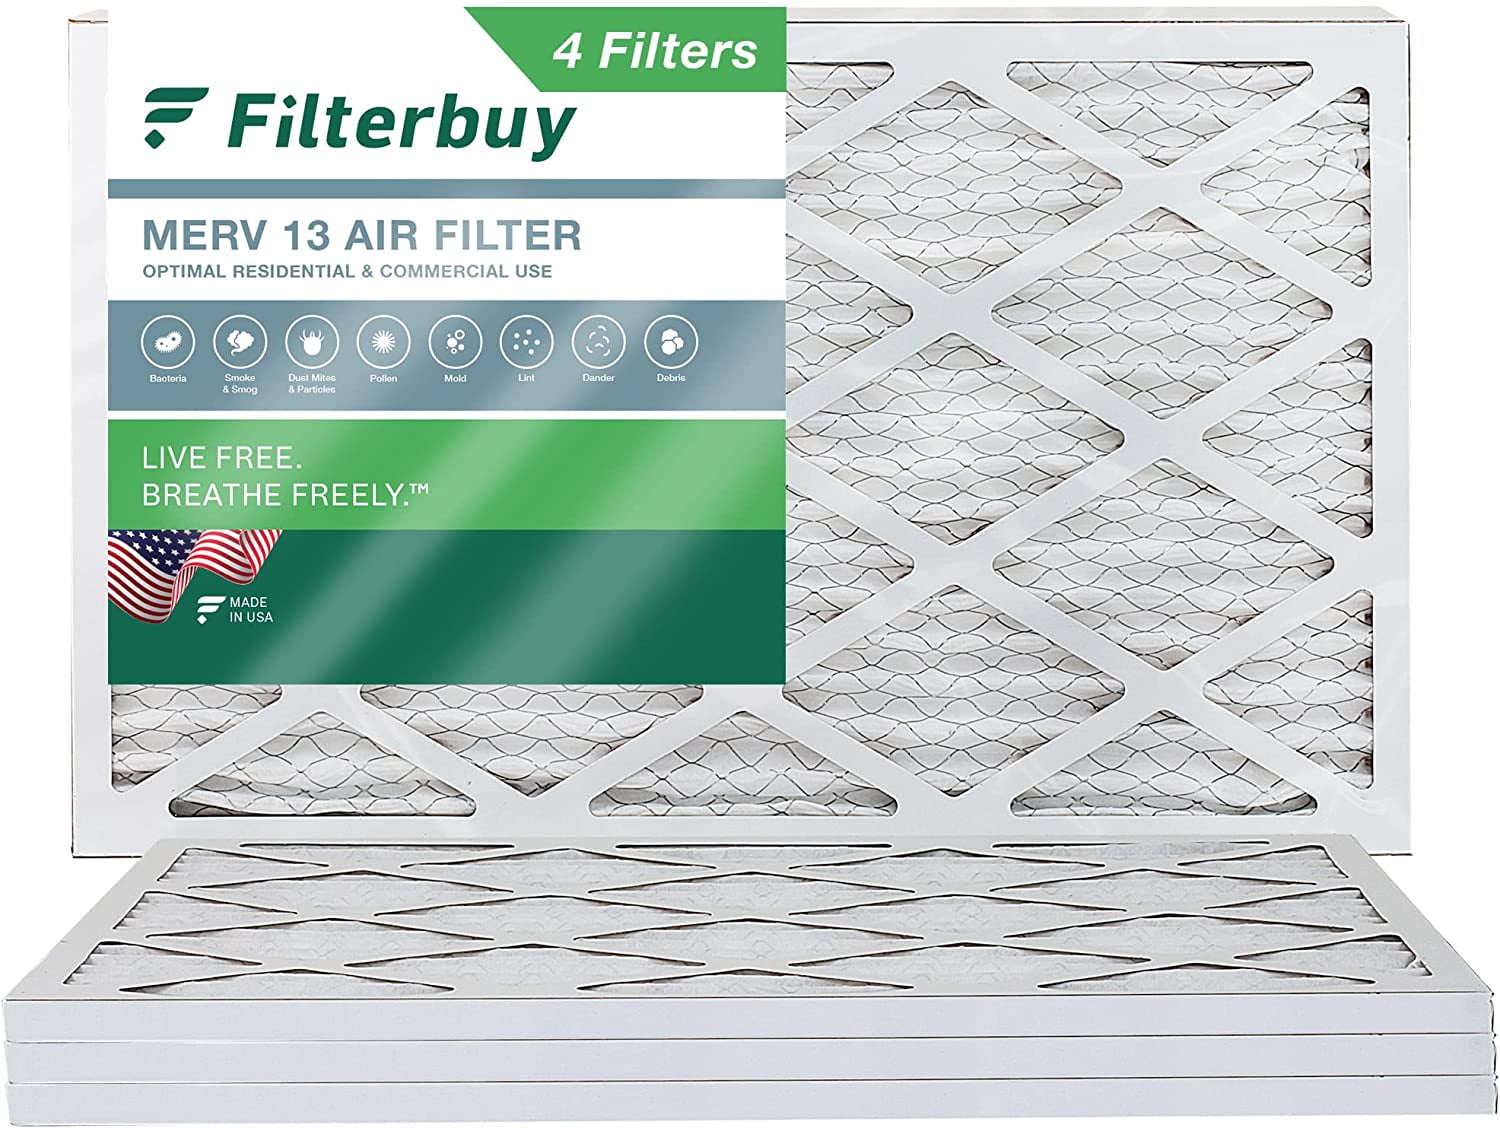 FLANDERS PRECISIONAIRE MERV 4 NESTED GLASS AIR FILTER 20X20X1" CASE OF 24 